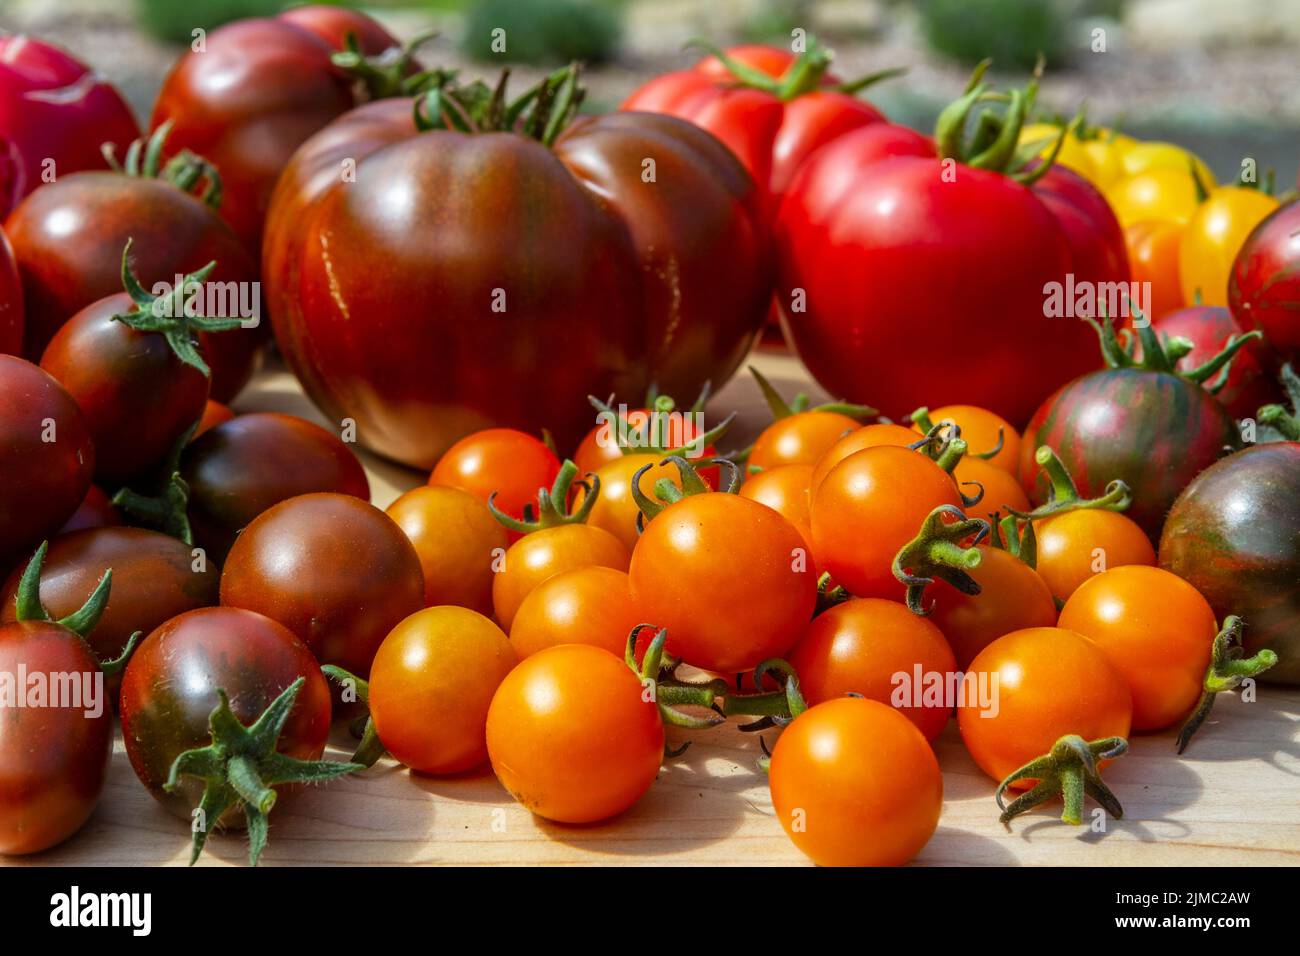 A colorful variety of just picked sun ripened organic tomatoes from a home garden sit on a wooden board in the sun. Stock Photo